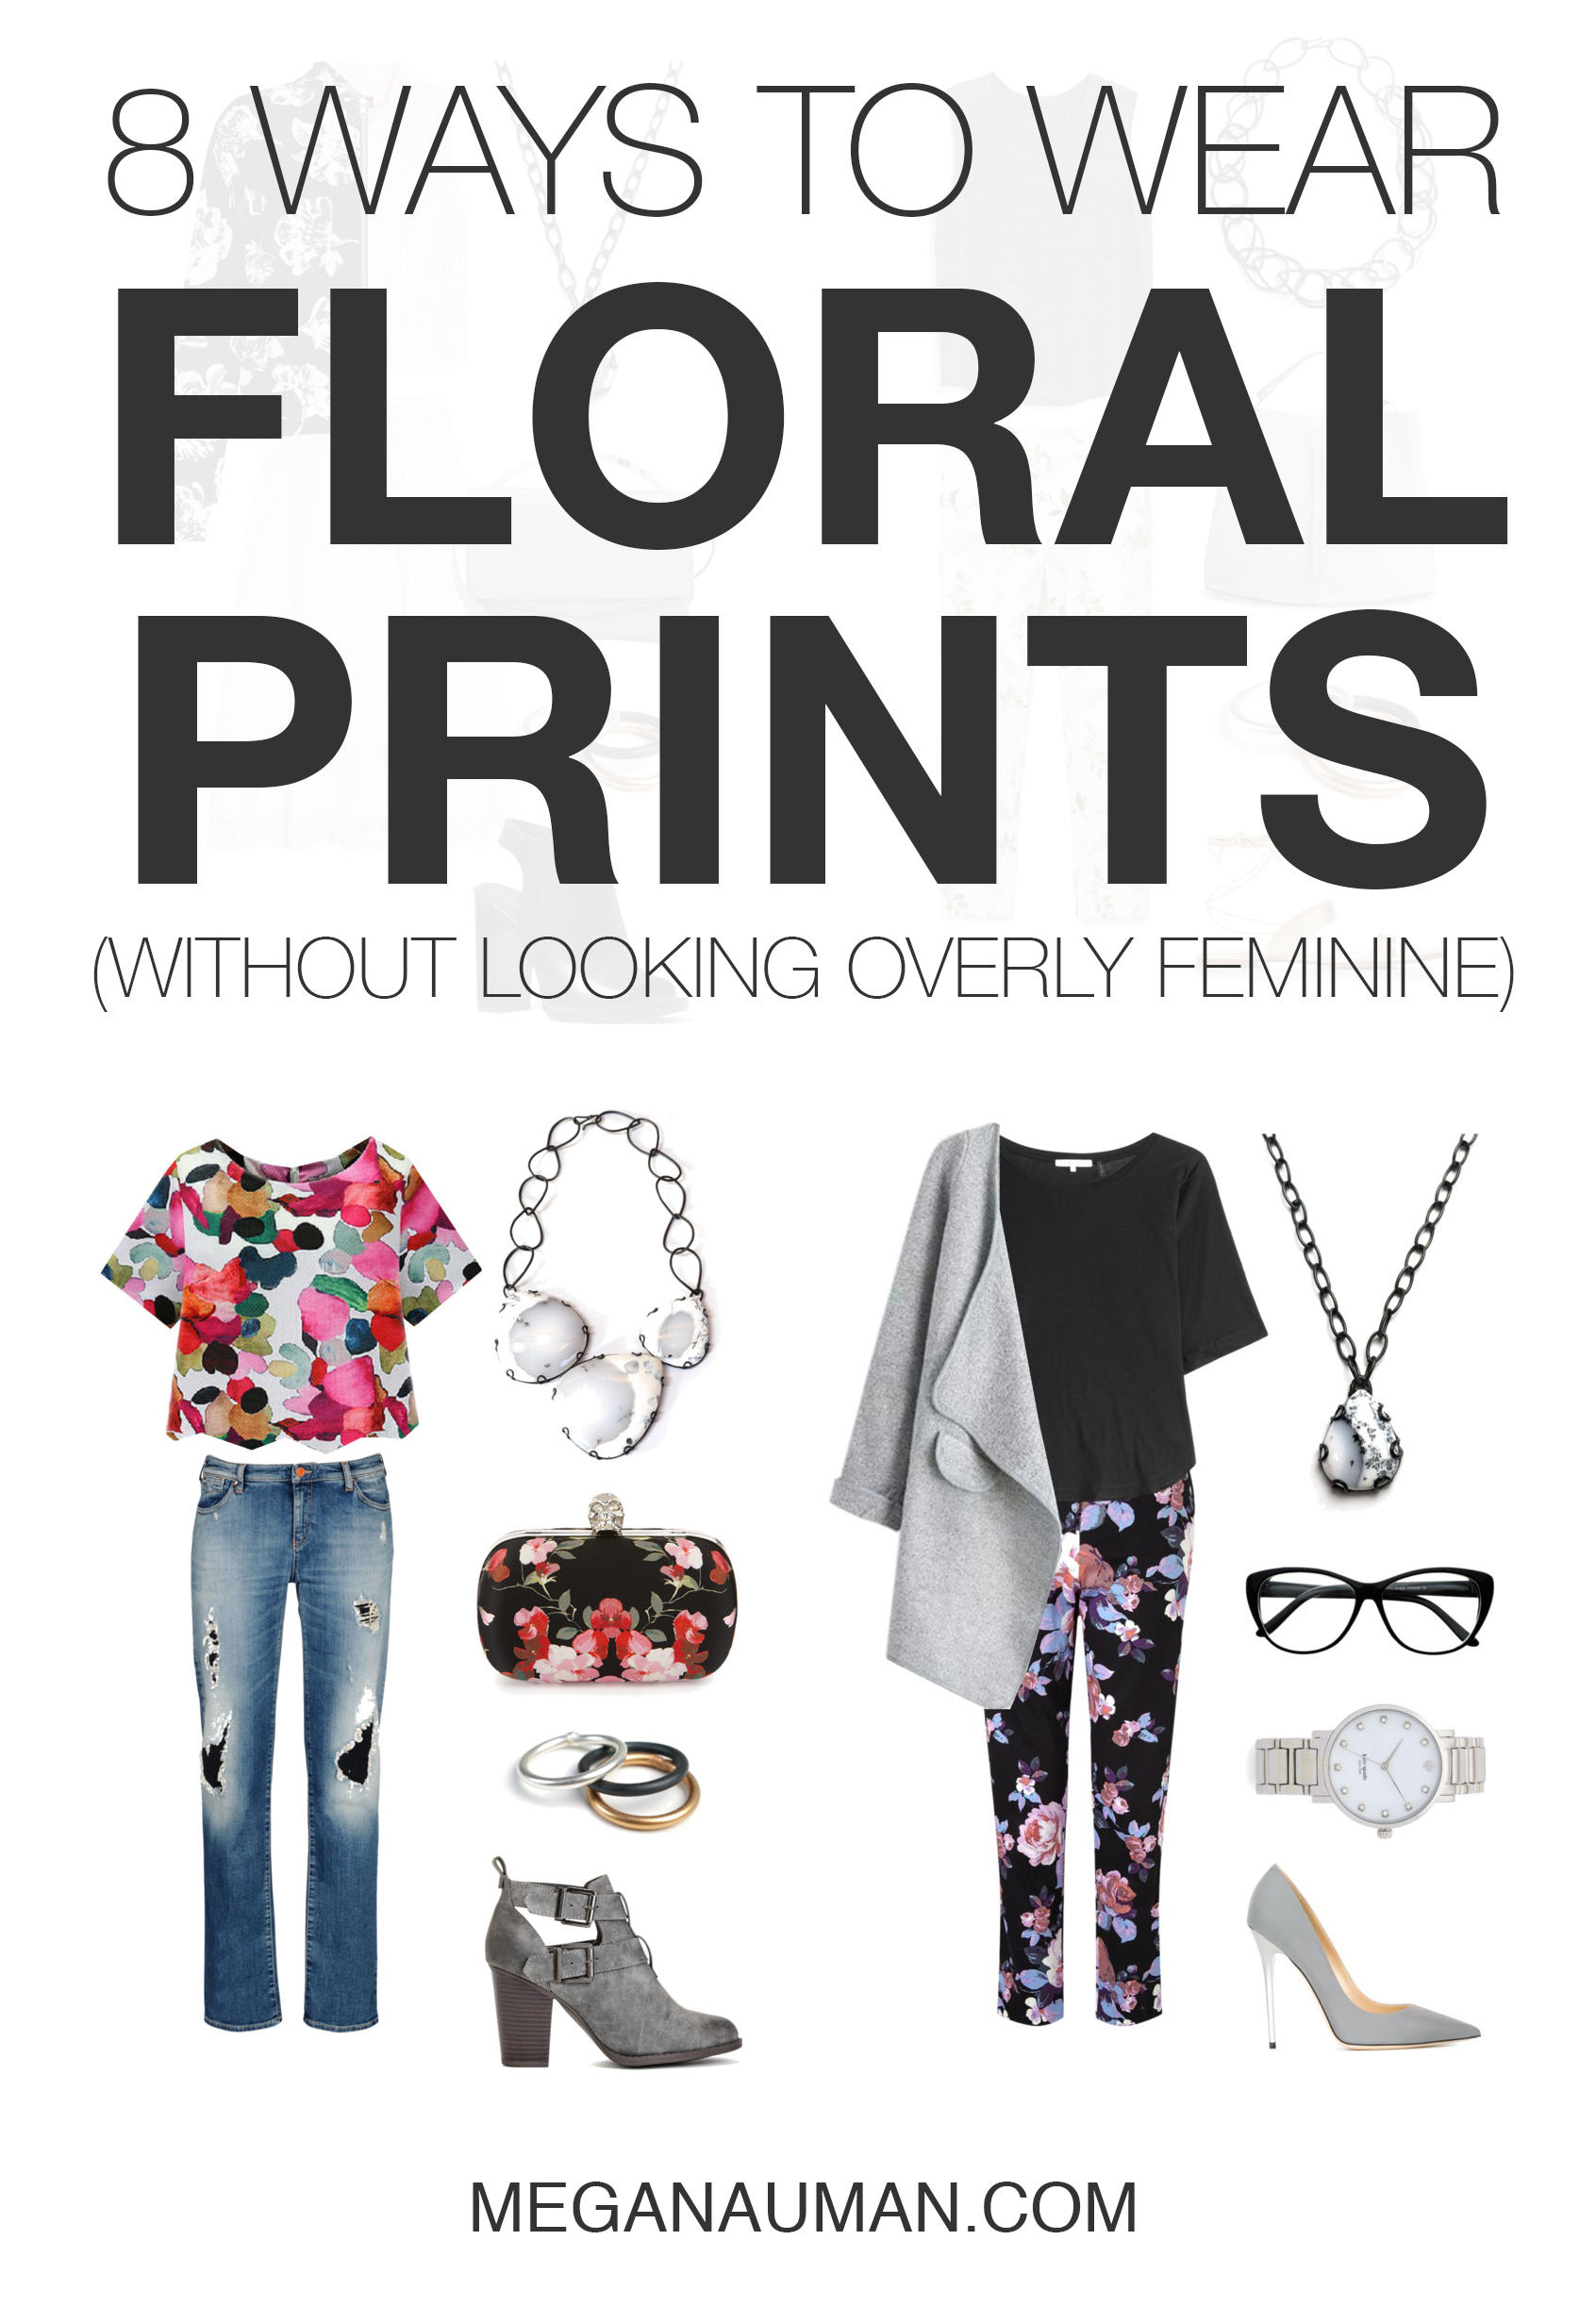 how to wear floral prints (and not look overly feminine) // from floral print pants to tops and skirts, click through for outfits ideas